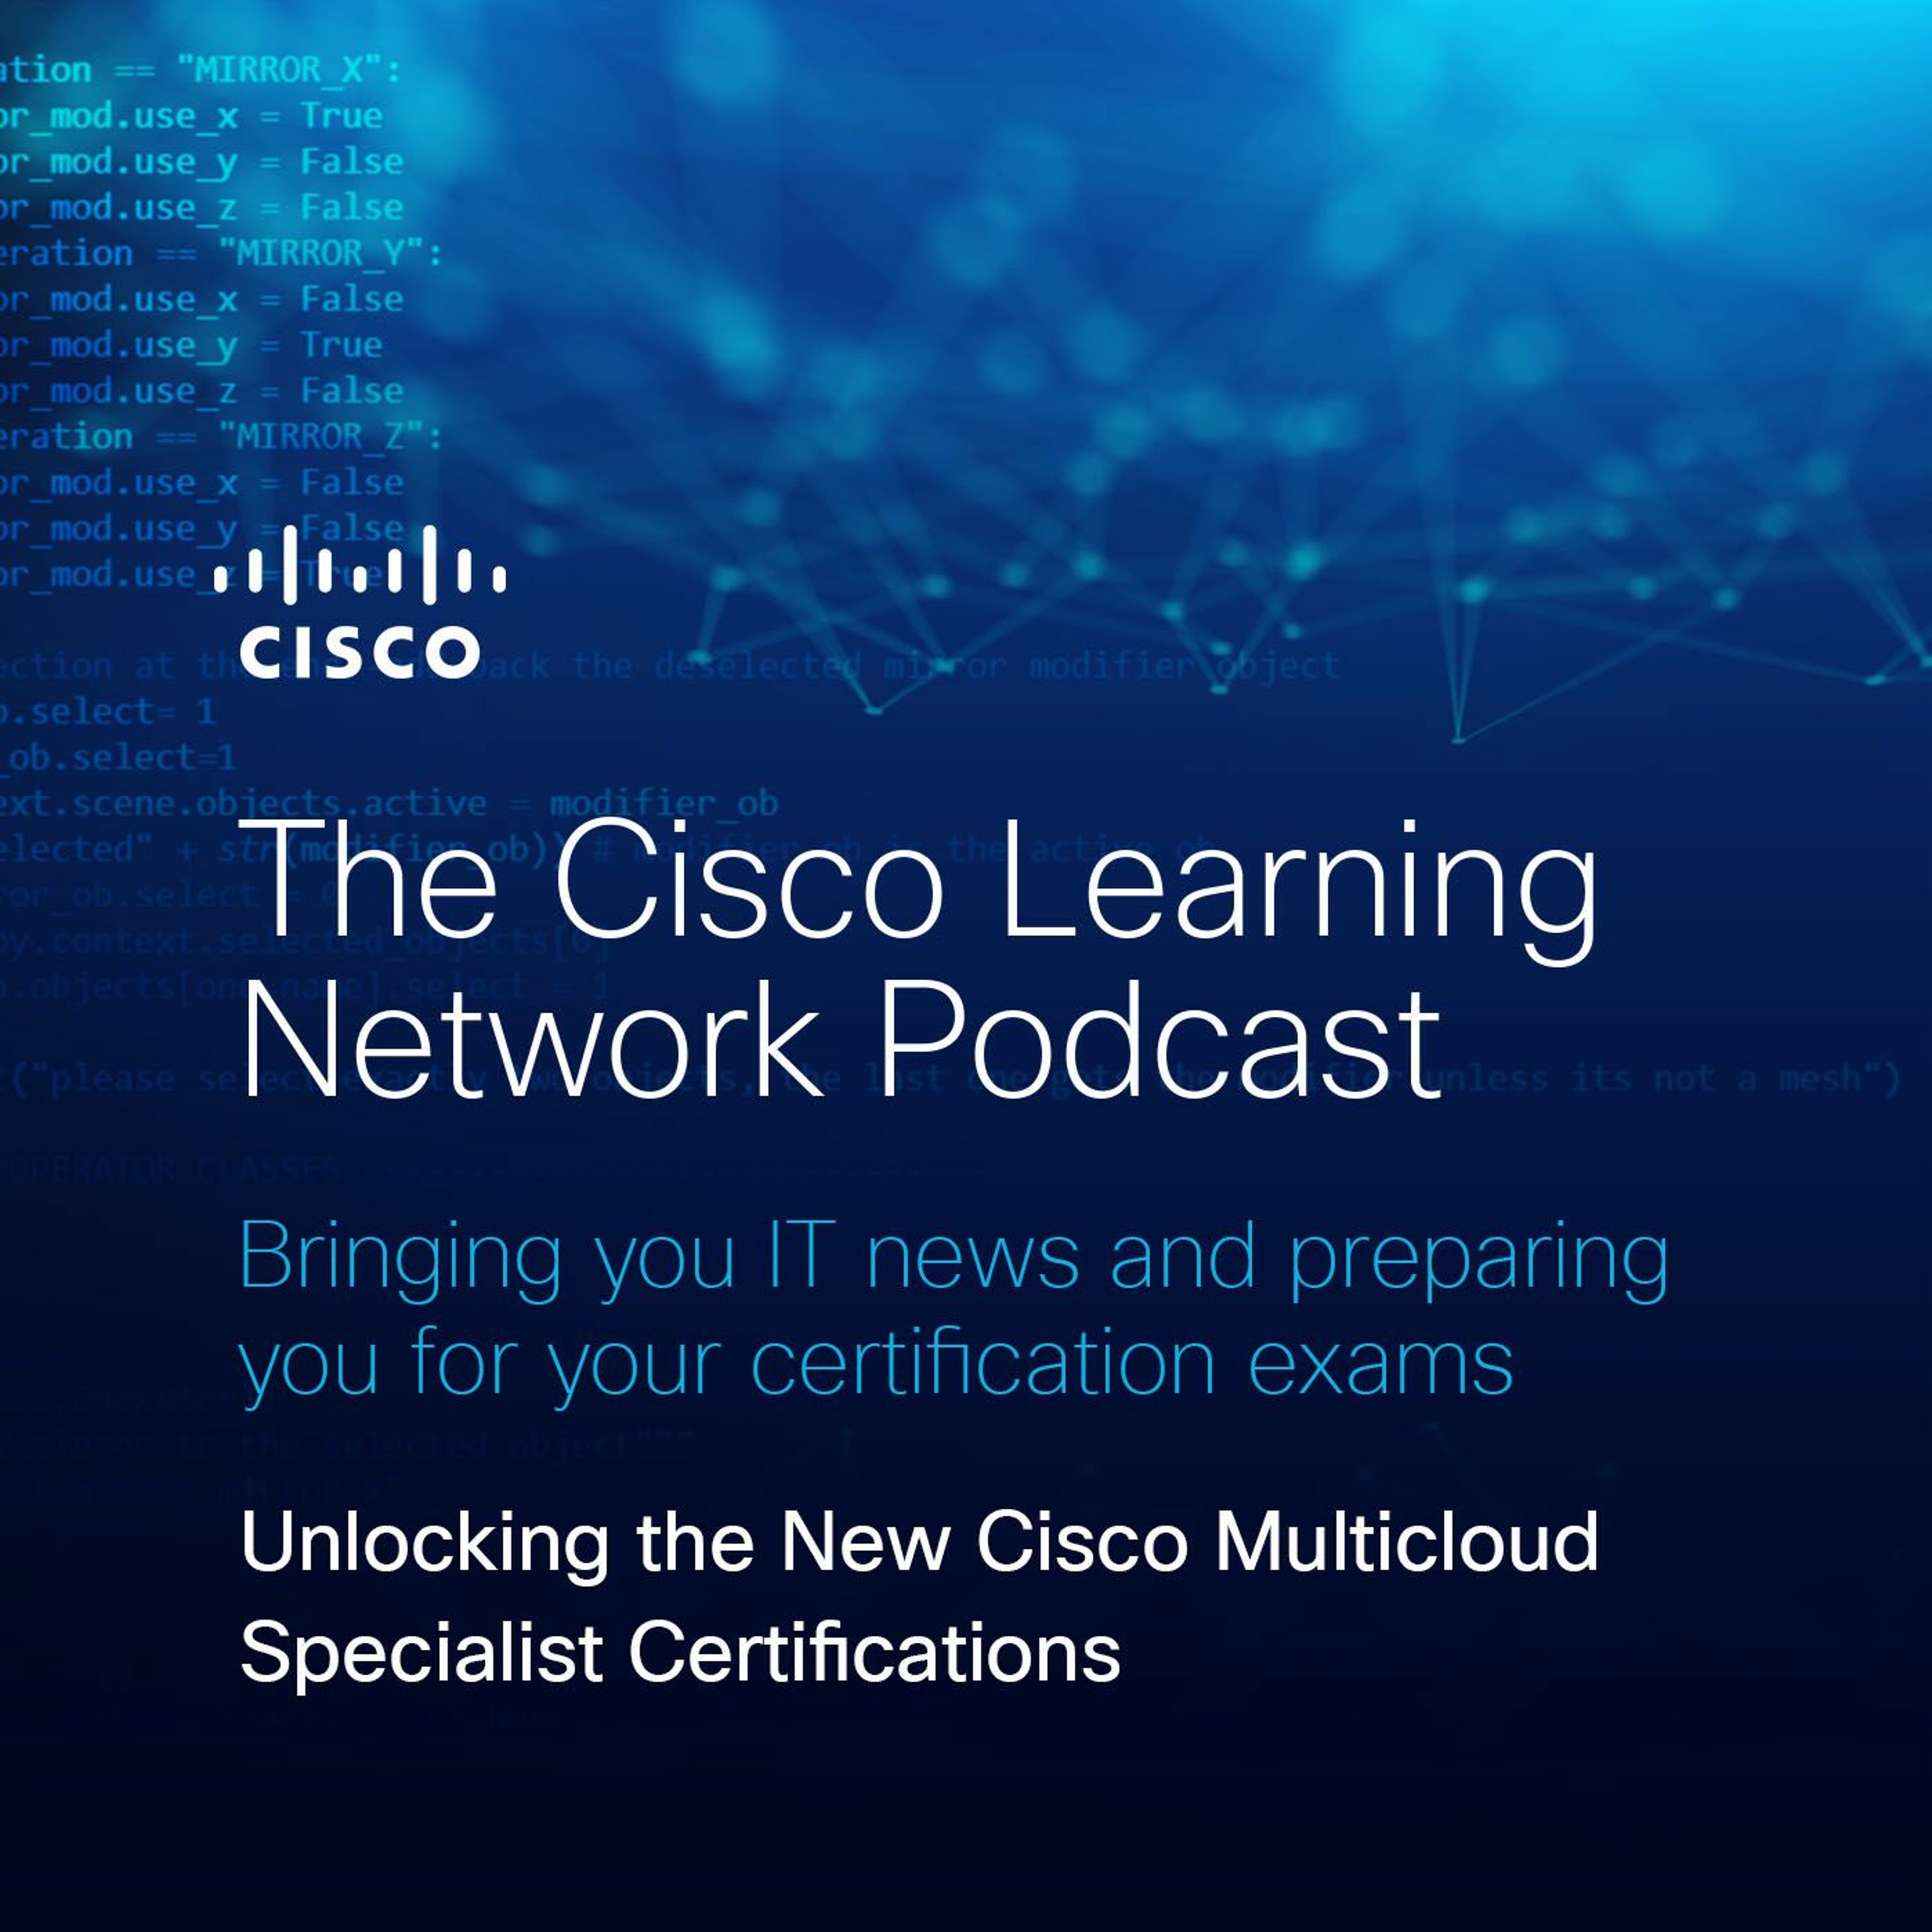 Unlocking the New Cisco Multicloud Specialist Certifications